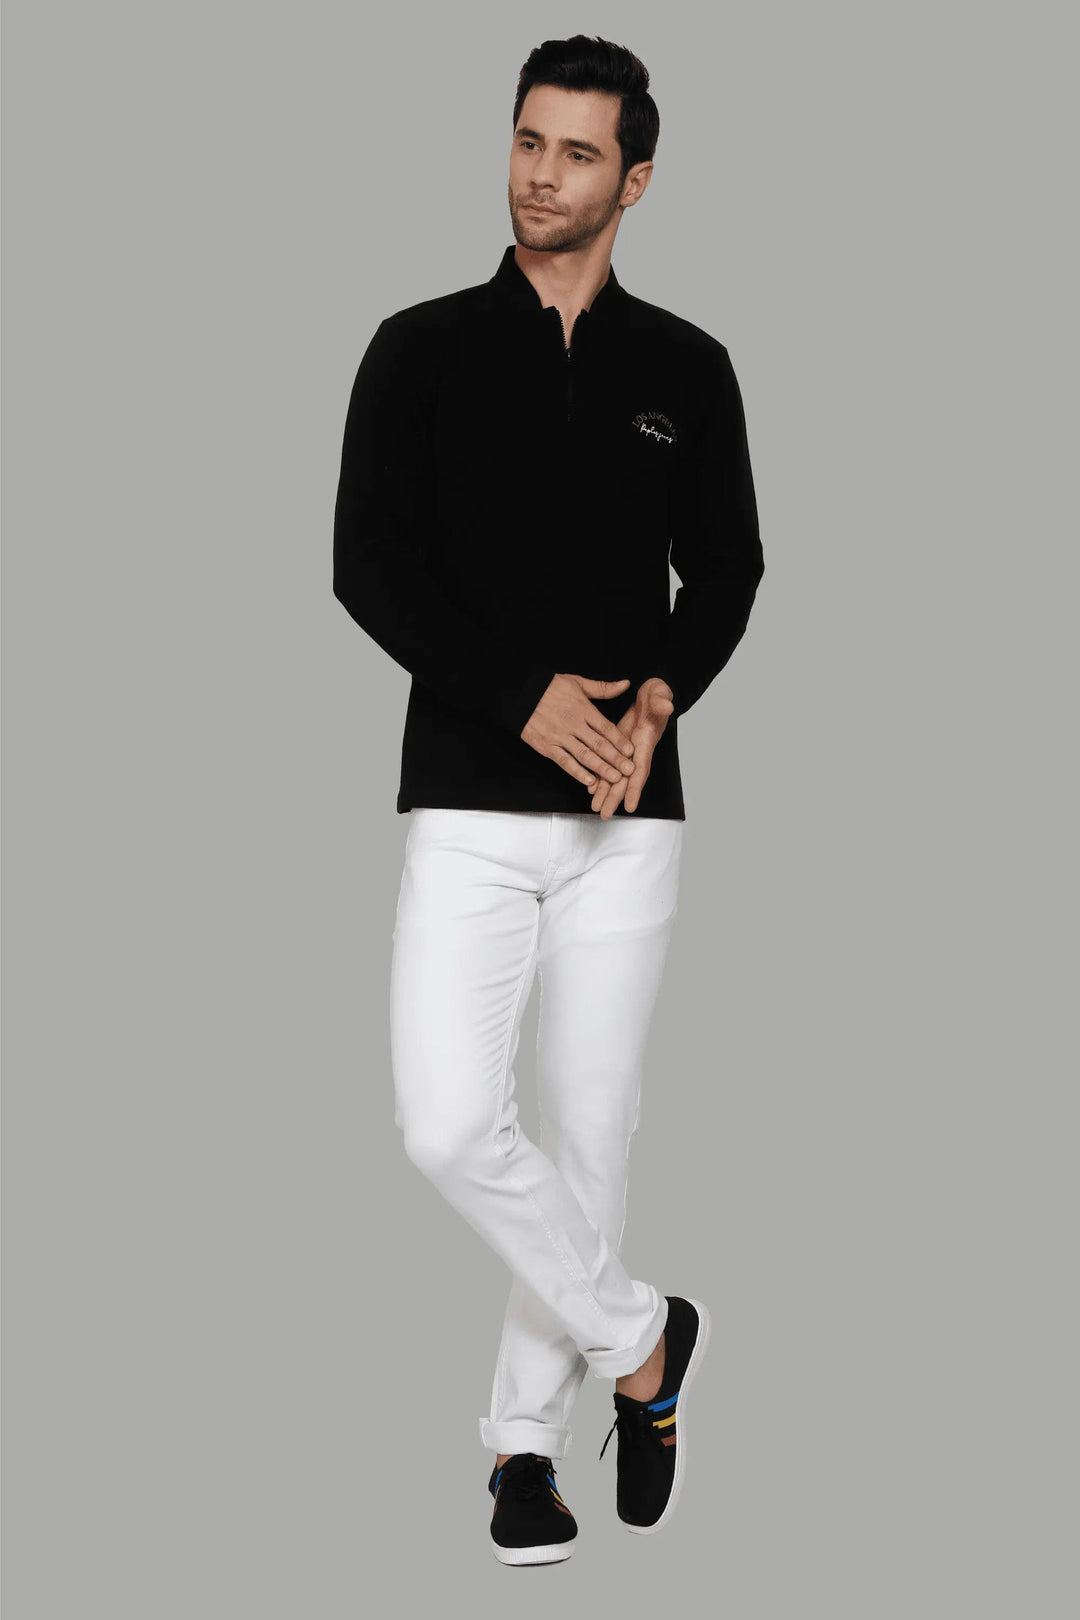 Men's Polo Neck Full Sleeve Black T-Shirt with zip closer - Peplos Jeans 